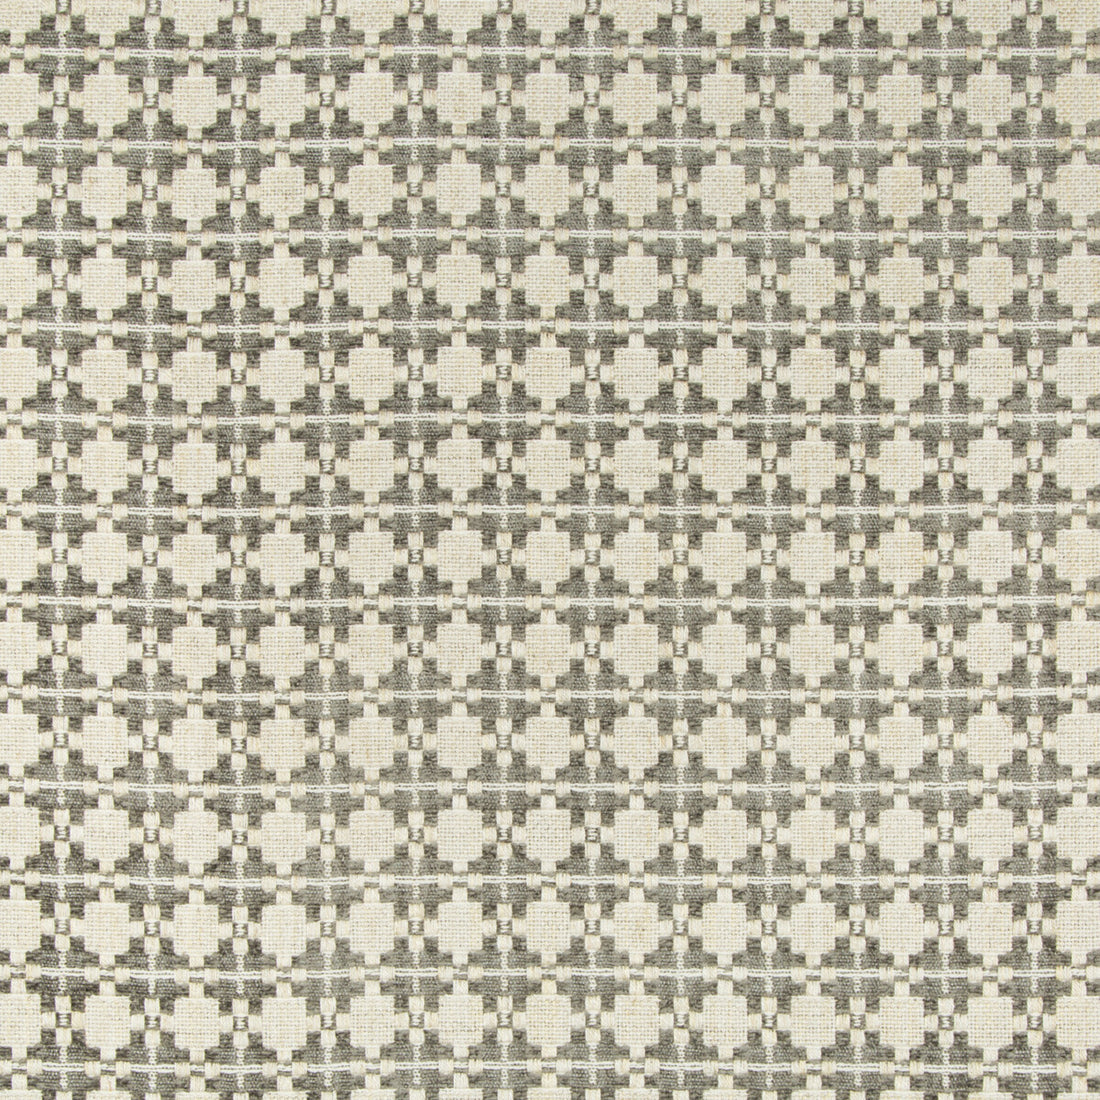 Back In Style fabric in slate color - pattern 34962.1611.0 - by Kravet Couture in the Modern Tailor collection